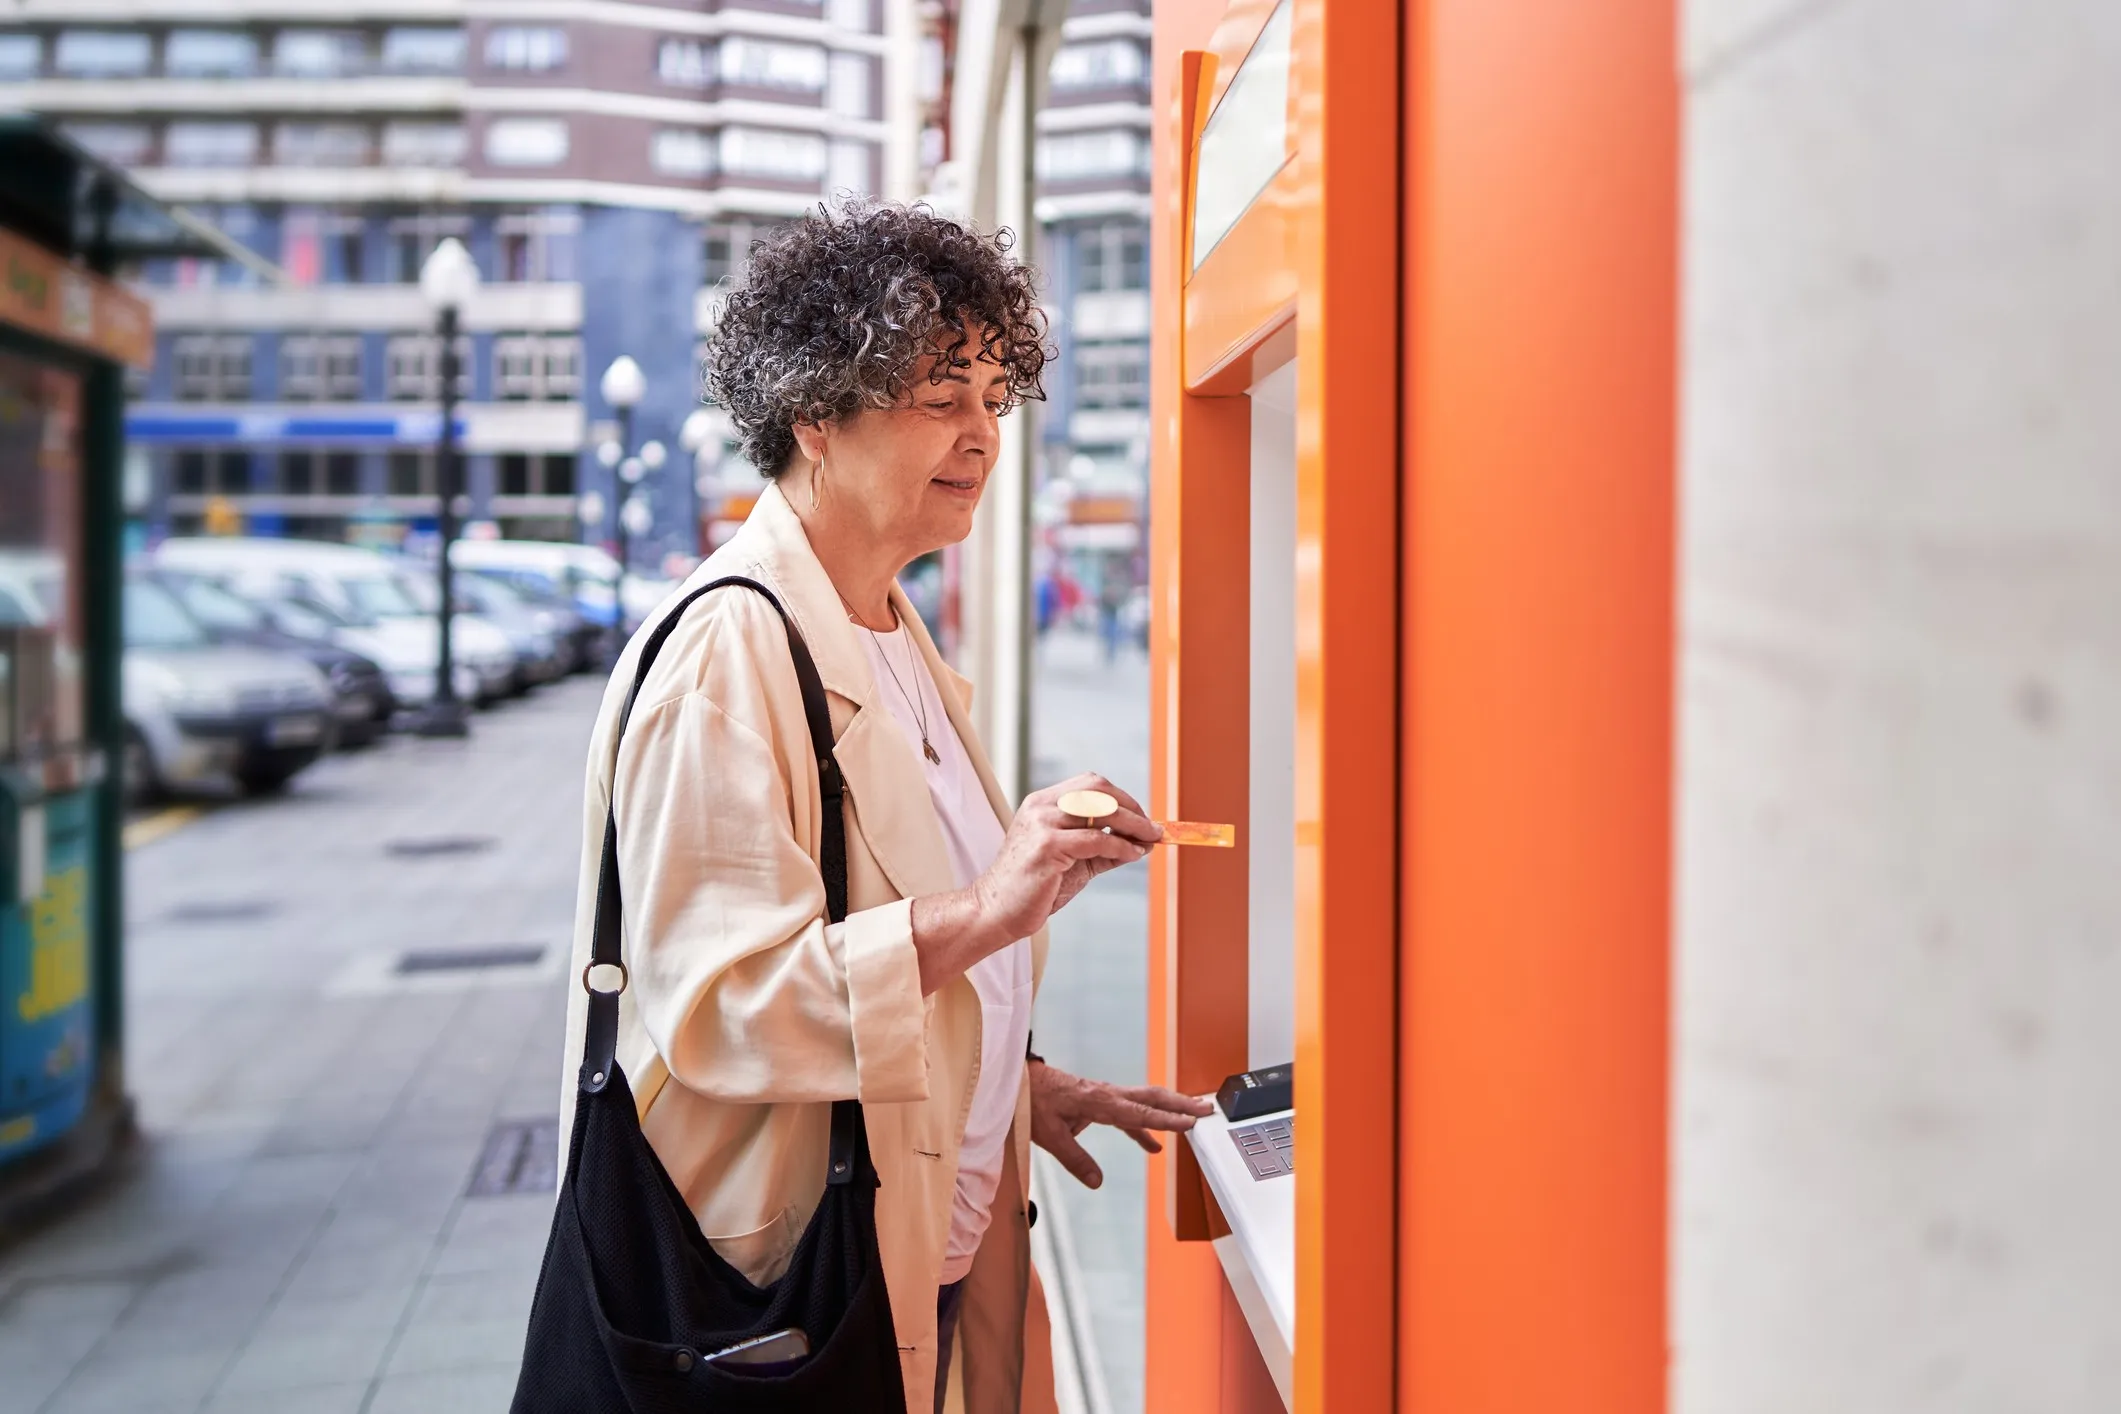 An older woman inserting her credit card into an ATM on a city street